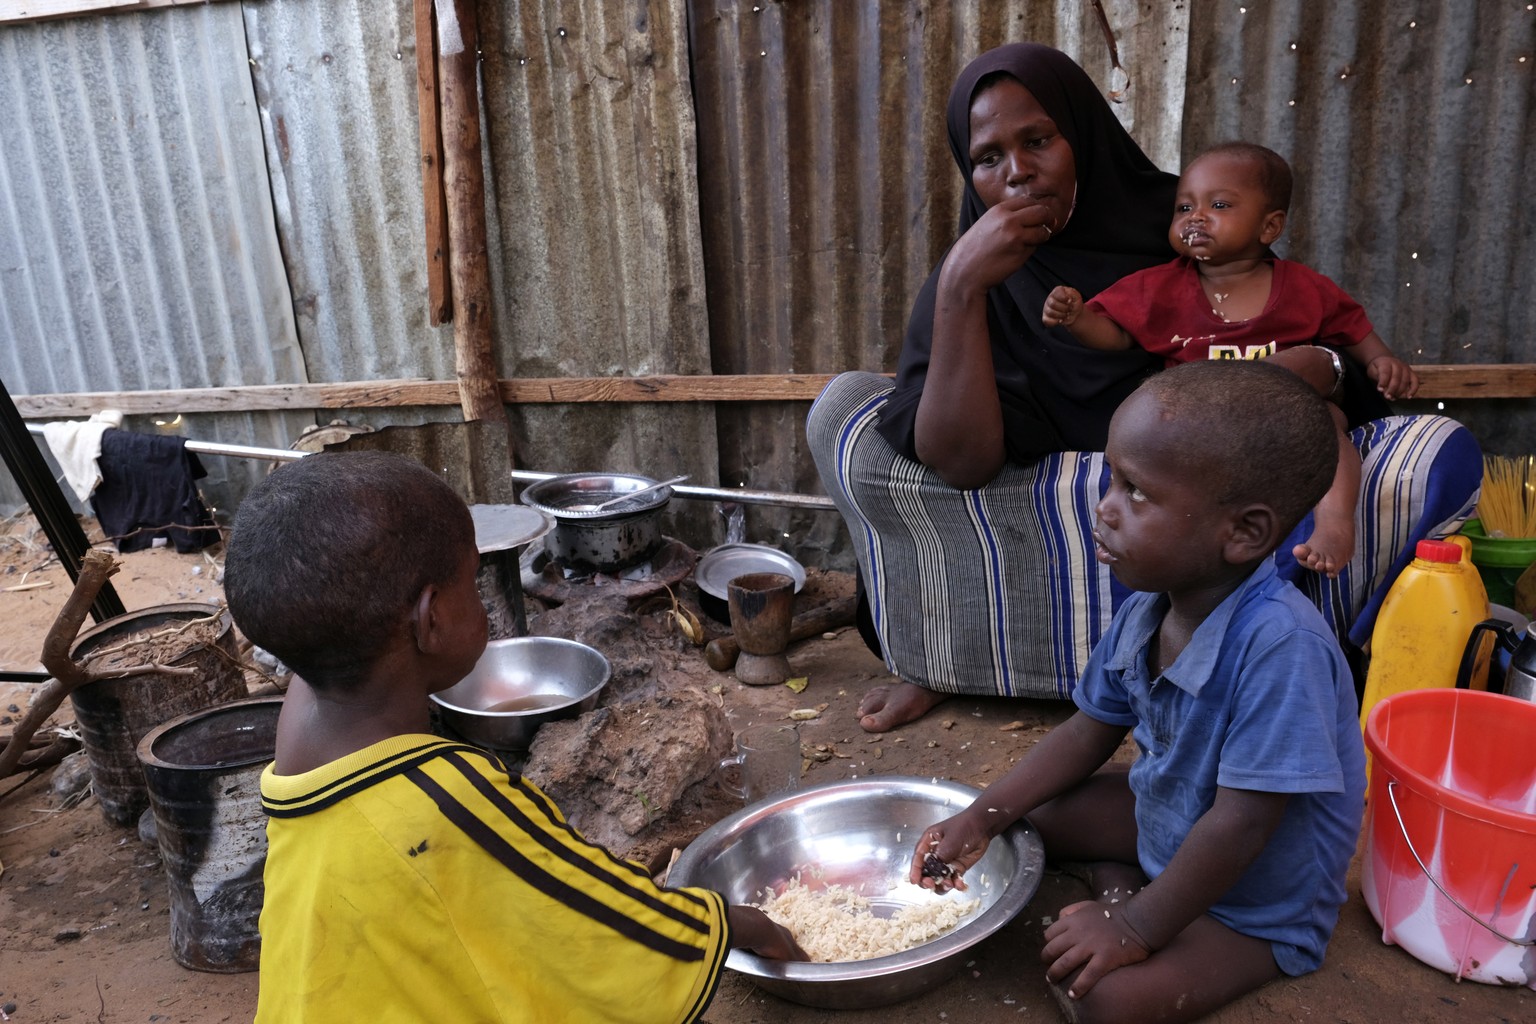 Hadiiq Abdulle Mohamed eats with her children as she speaks during an interview with Associated Press at an internally displaced people camp on the outskirts of Mogadishu, Somalia, Friday, March 24, 2 ...